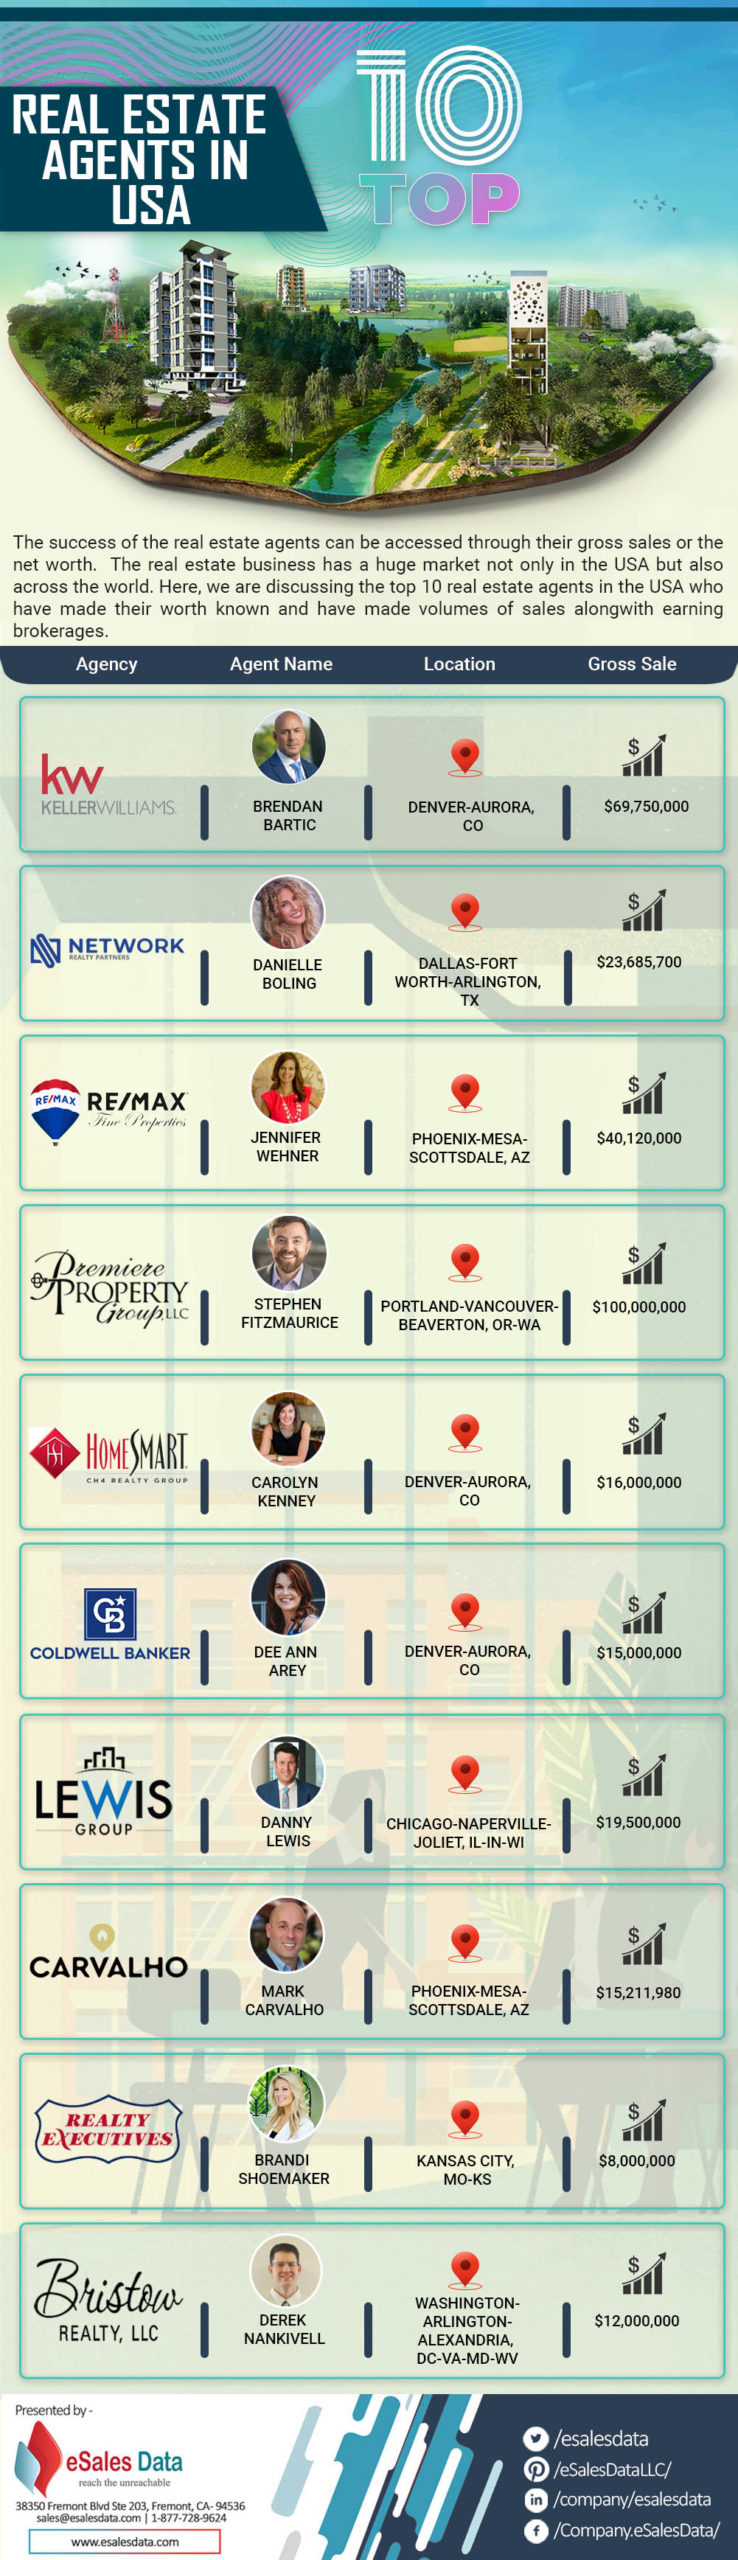 Top 10 Real Estate Agents in USA